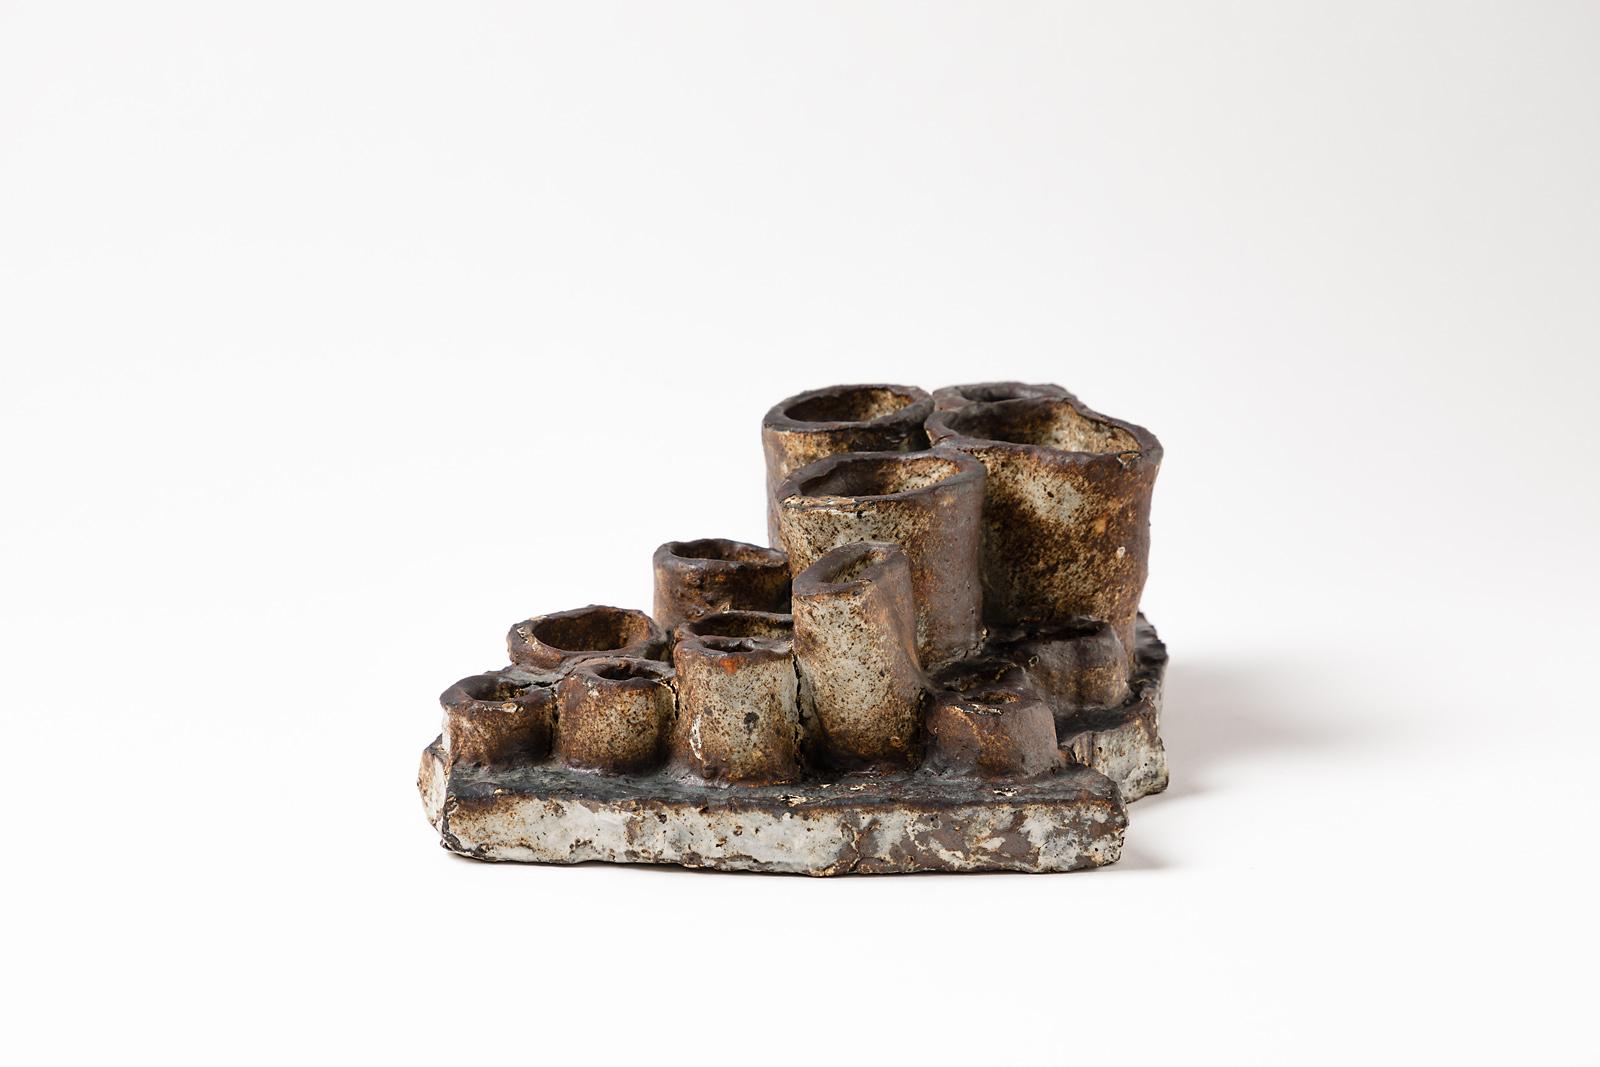 Abstract stoneware ceramic sculpture by French artist,

circa 1970, realized in La Borne.

Elegant brown, black and white ceramic colors glazes and firing effects.

Original freeform, possibility to wall sculpture.

Measures: Height 10cm,